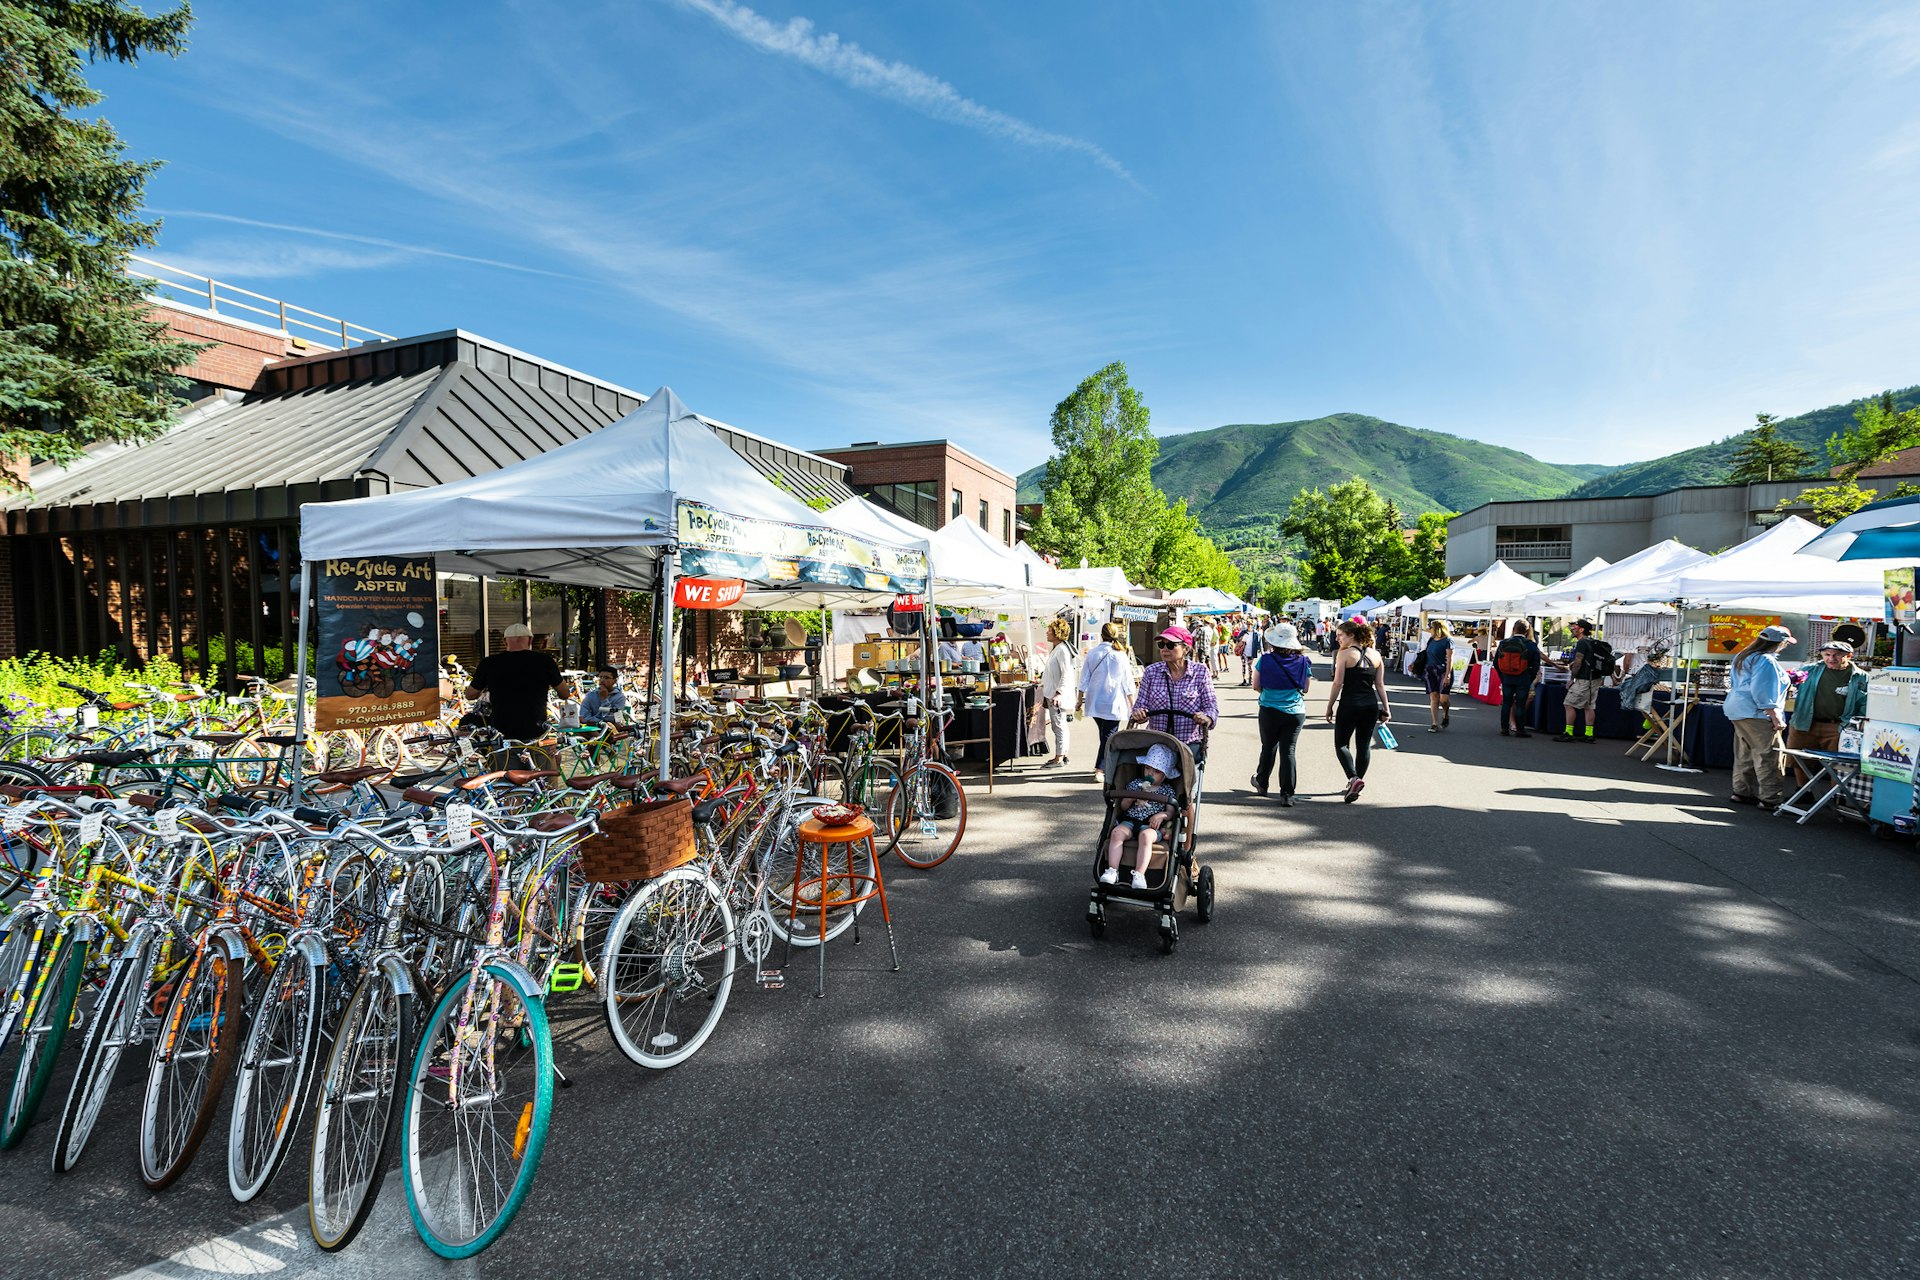 Vendors selling vintage bicycles at stall stand in farmers market with people walking in outdoor summer street